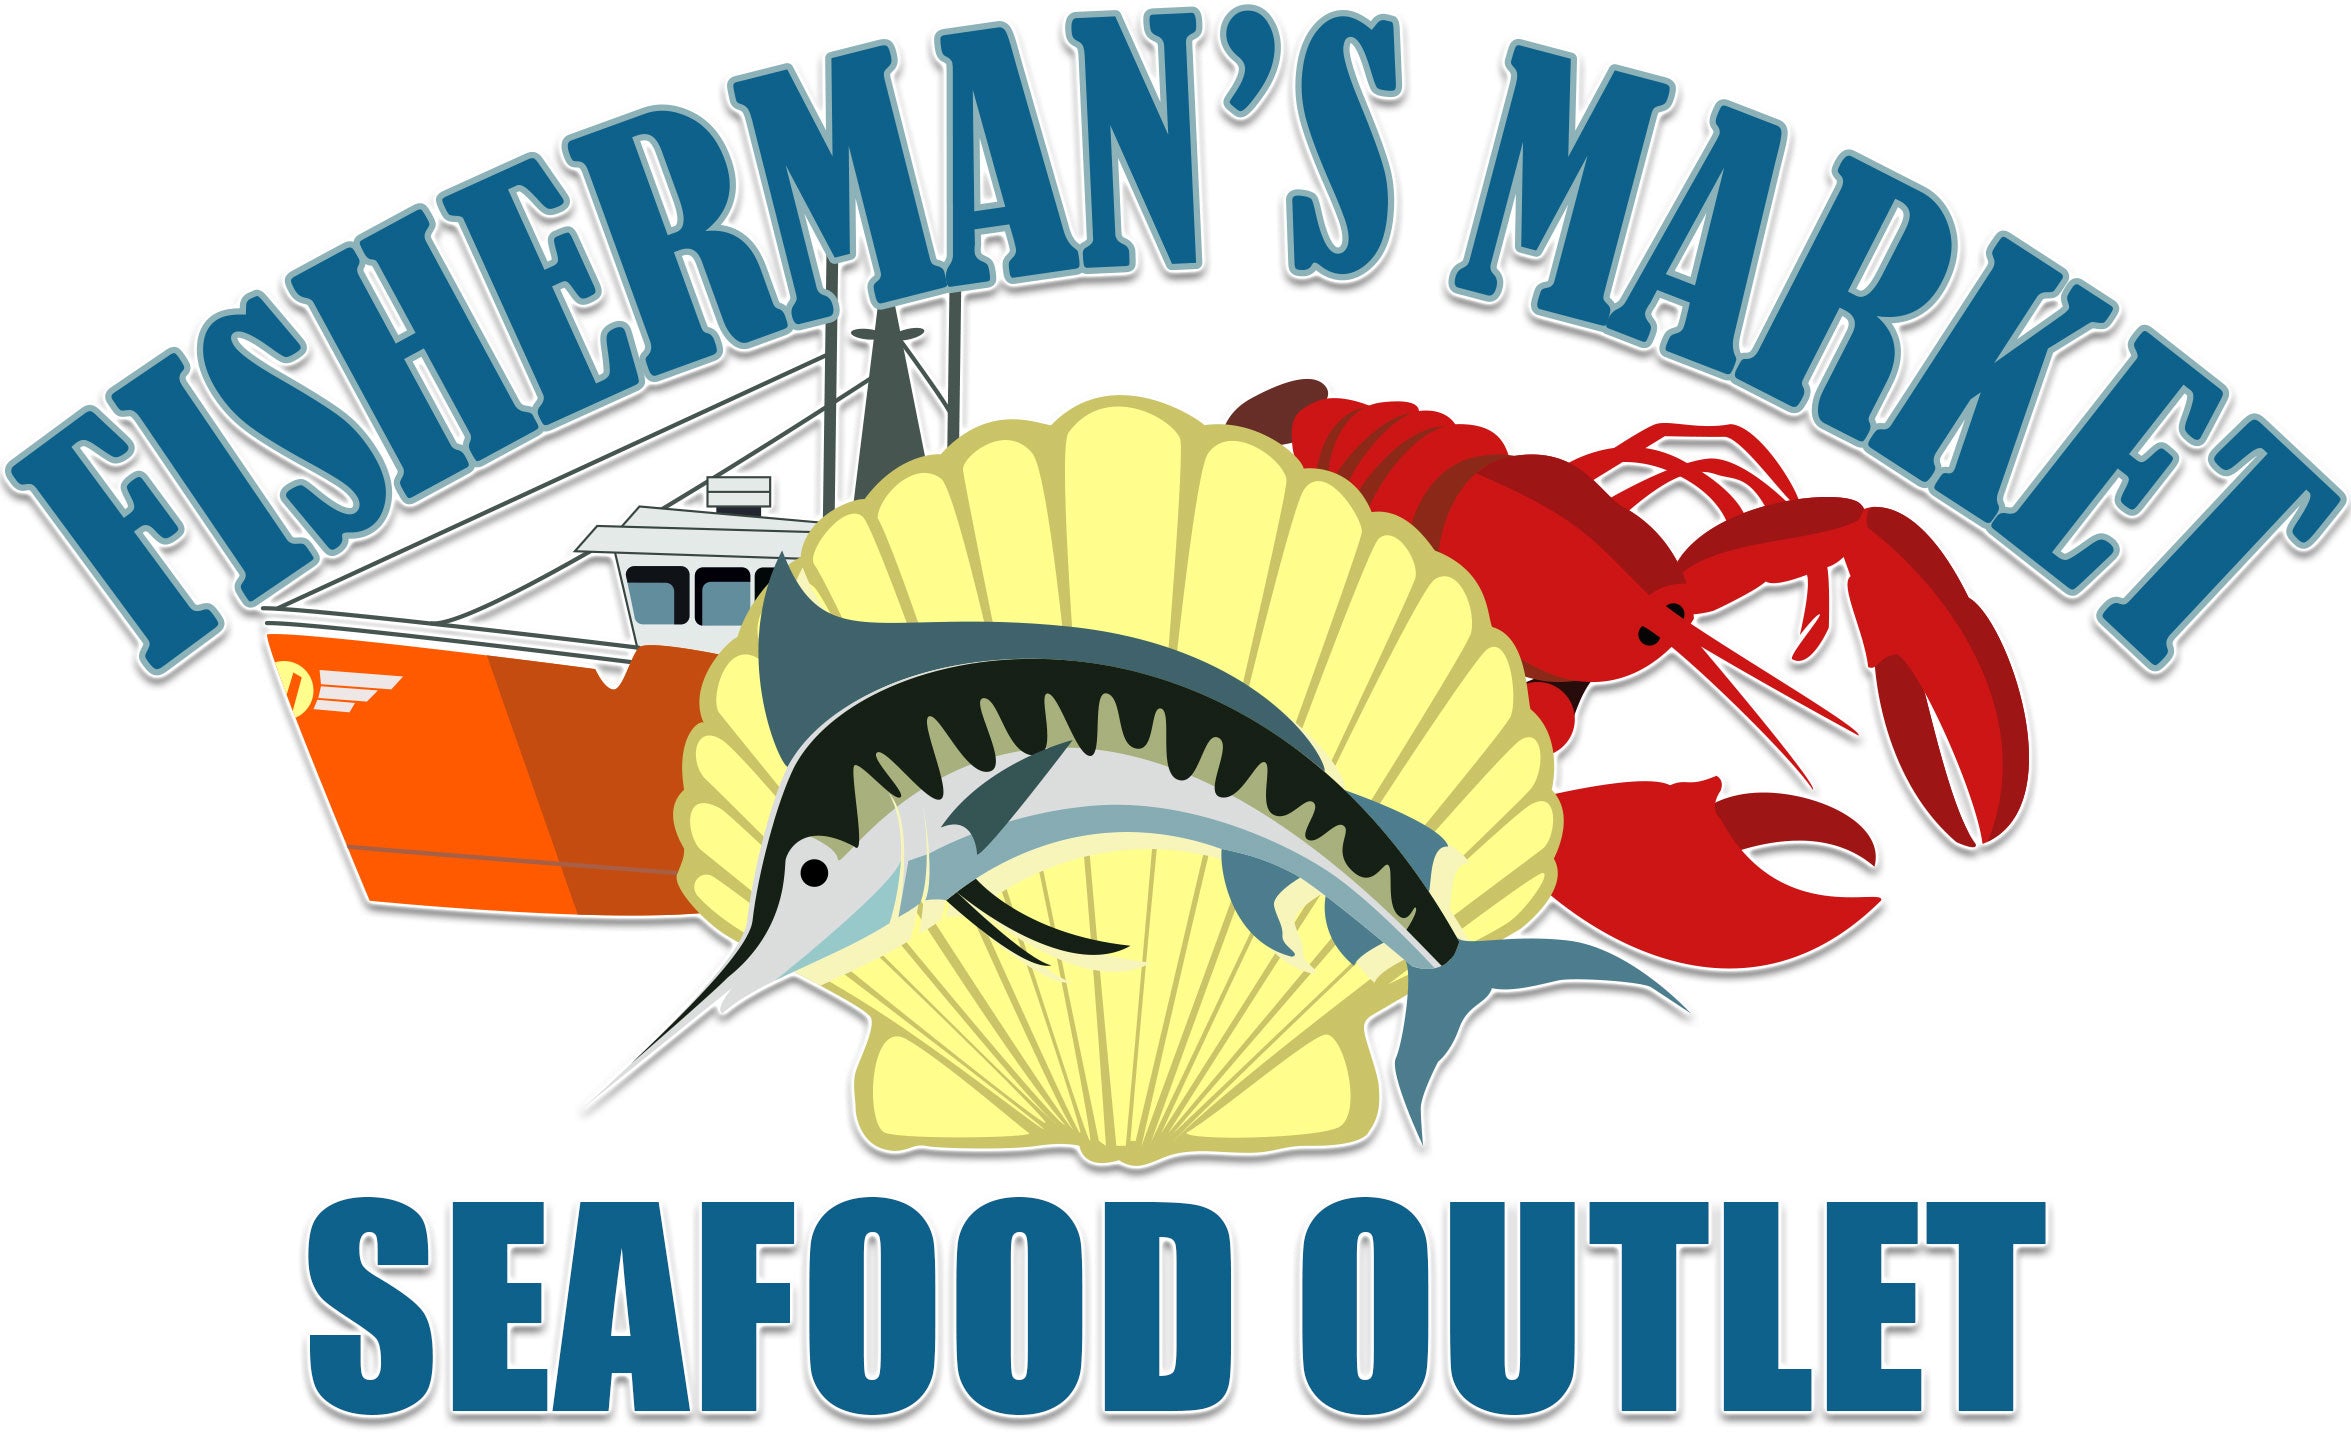 Fisherman's Market Seafood Outlet Product List